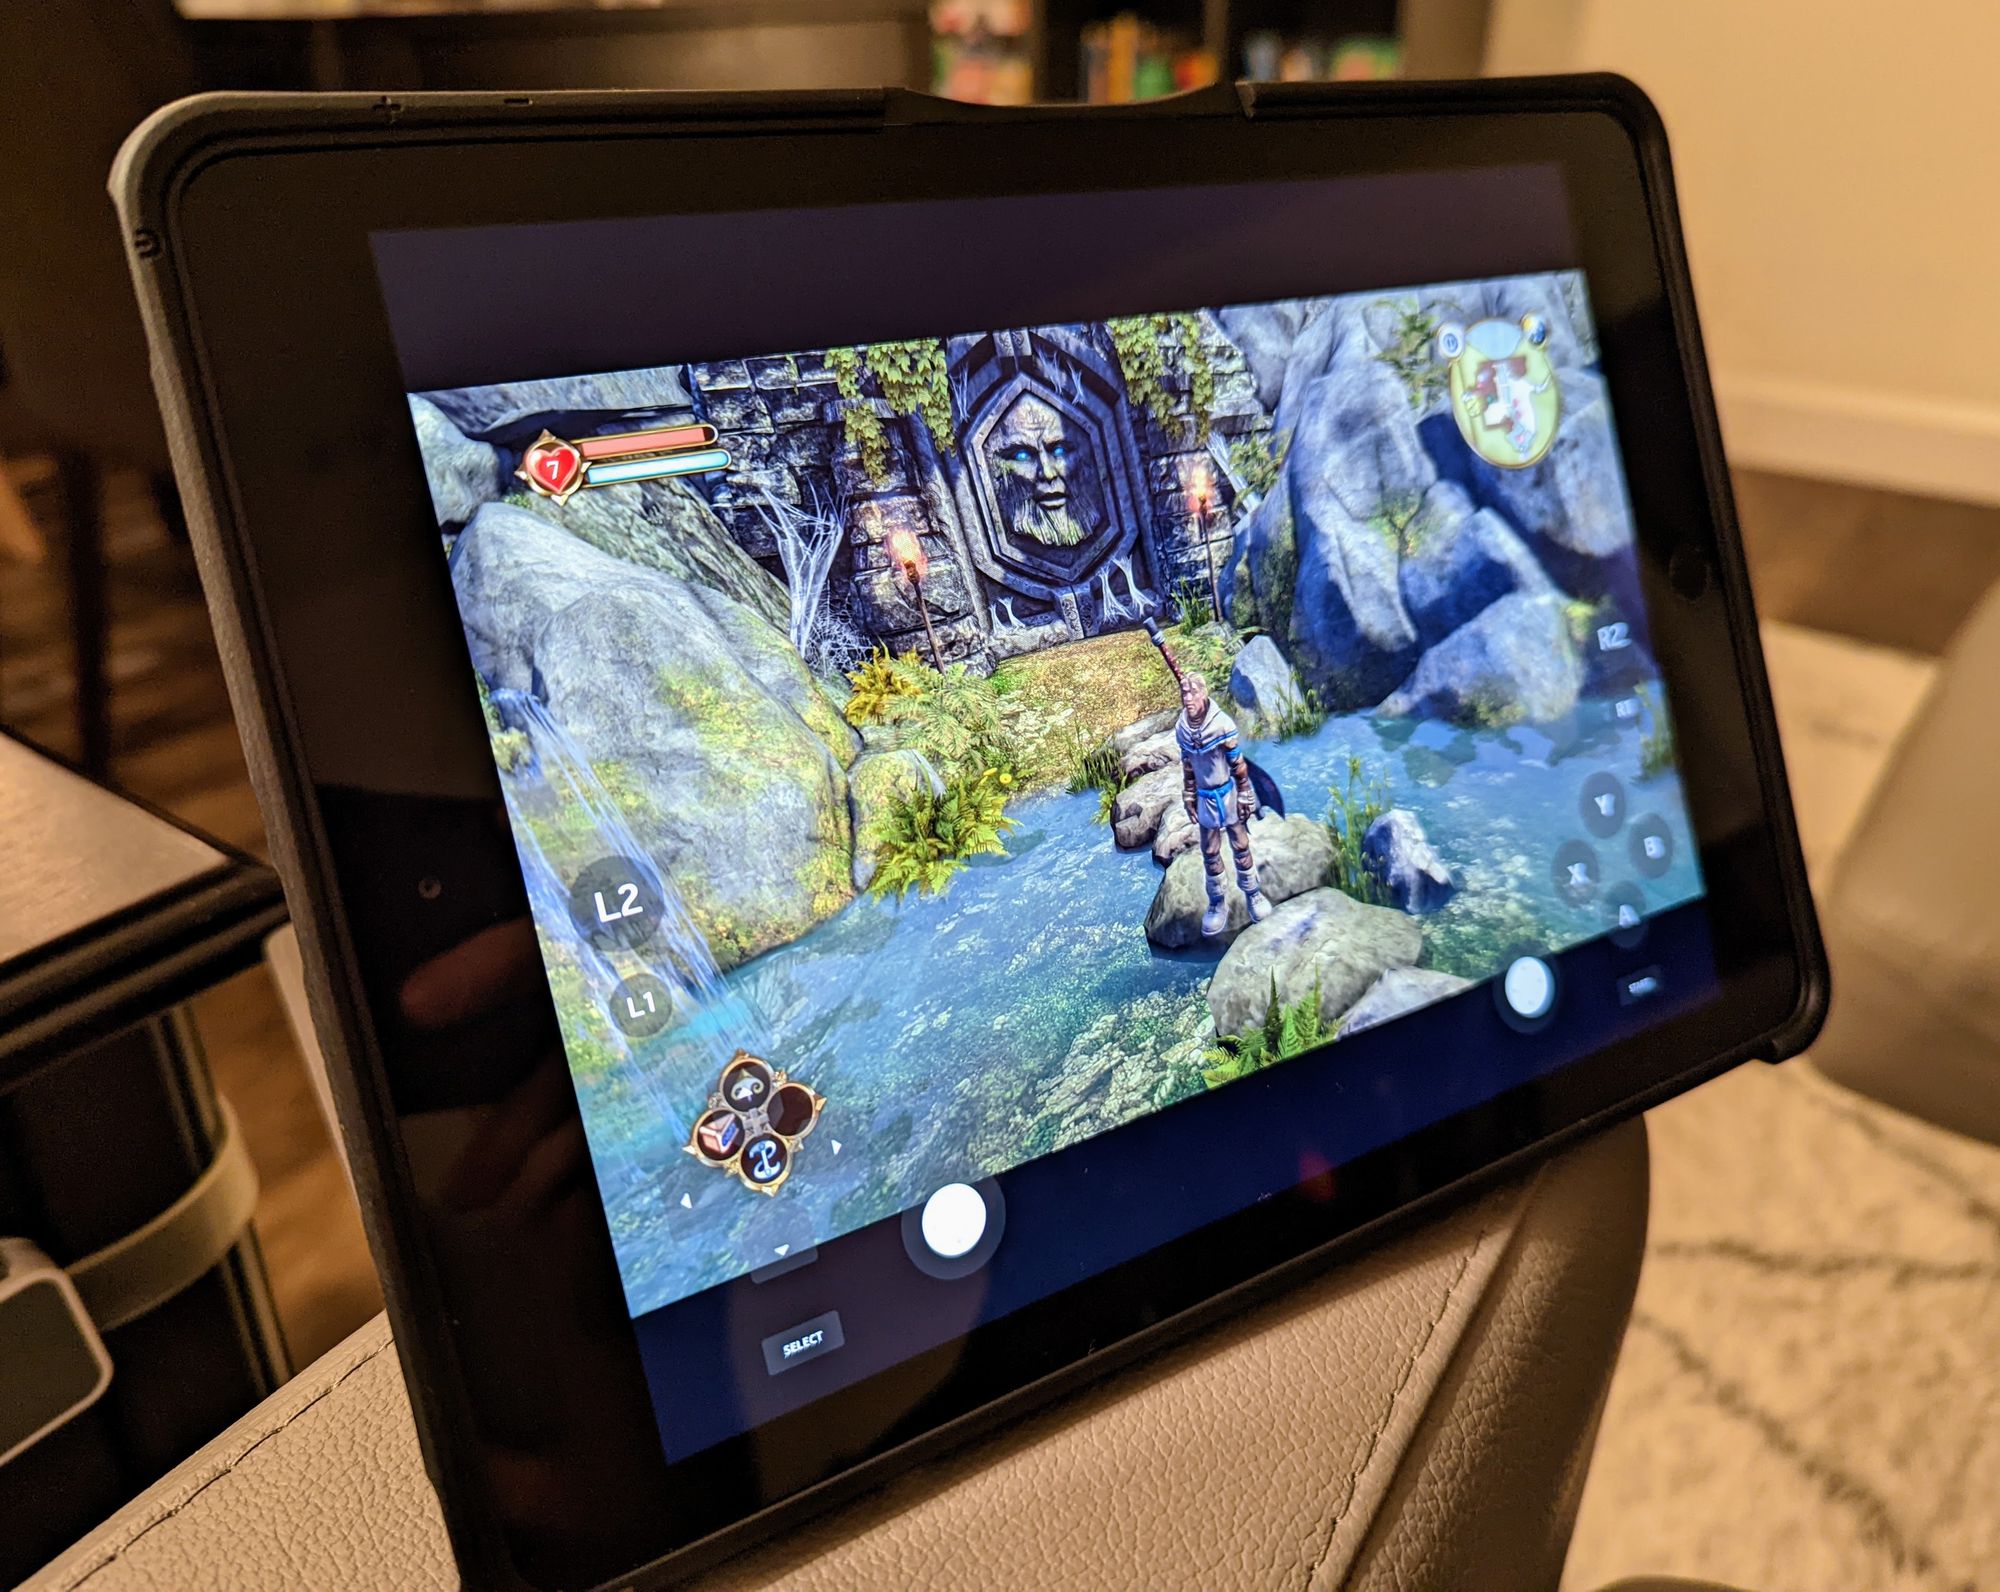 How to stream games from your gaming PC to any device in your home without a subscription